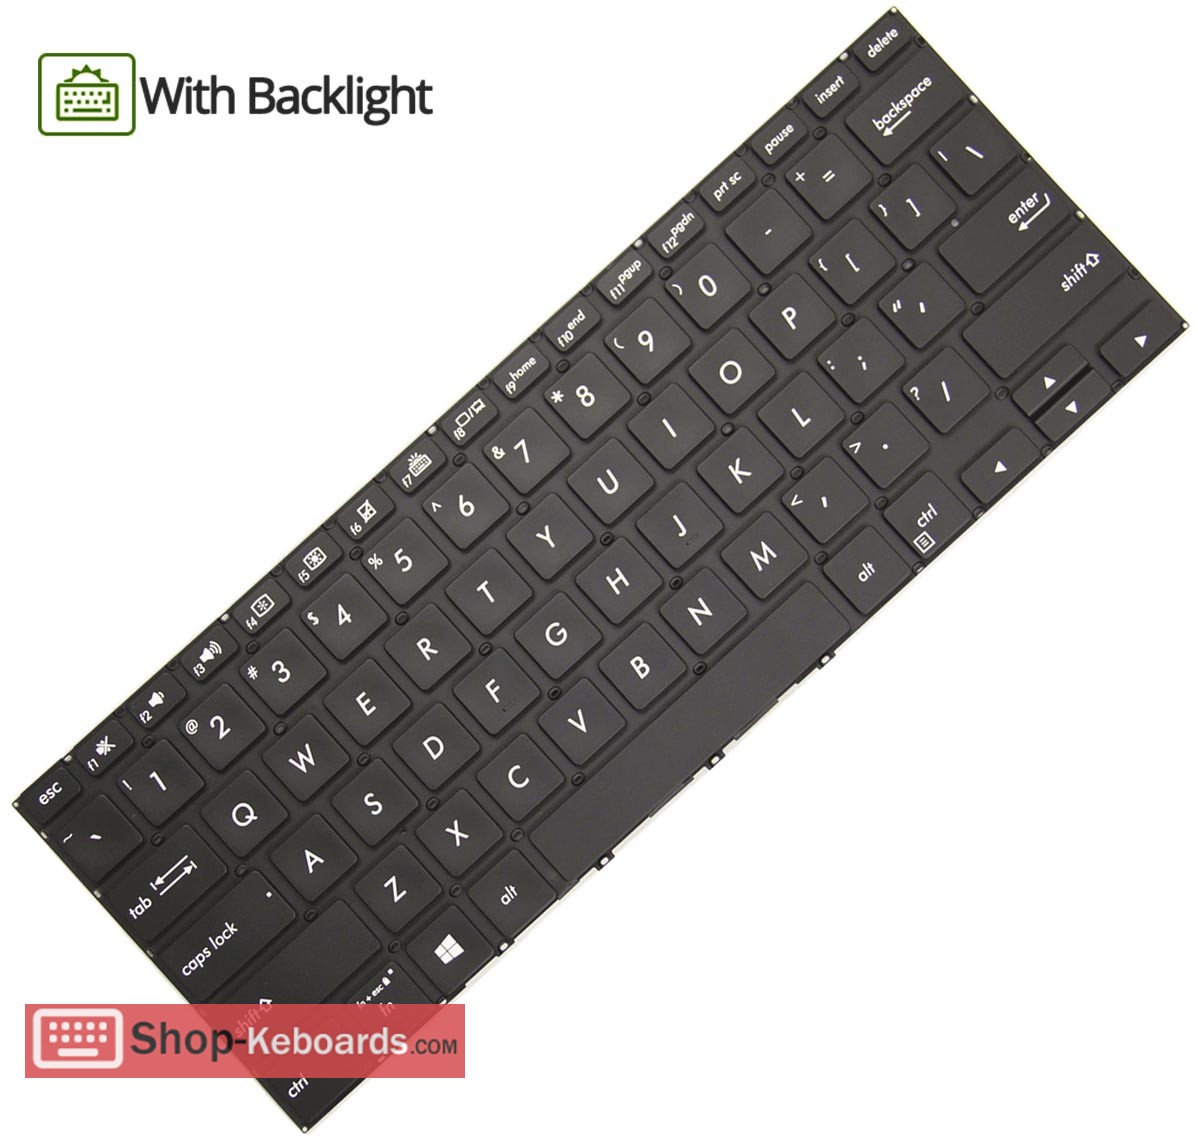 Asus 0KNB0-1626US00 Keyboard replacement